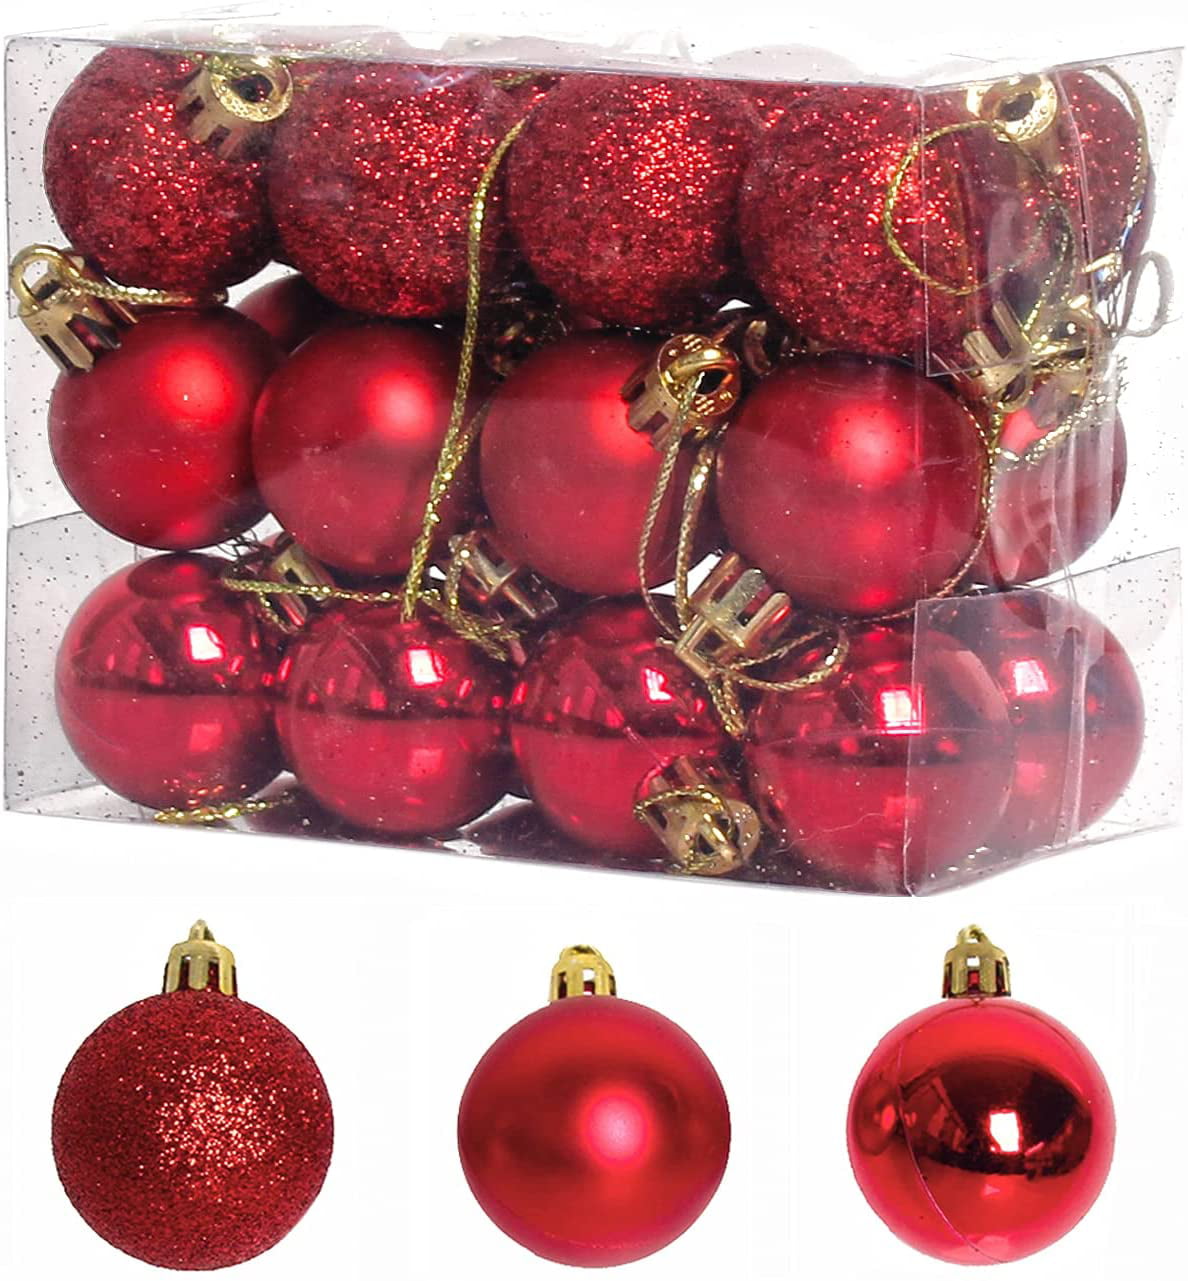 Details about   30X Christmas Shatterproof Balls Mixed Color Xmas Tree Hanging Pendant DIY Decor 